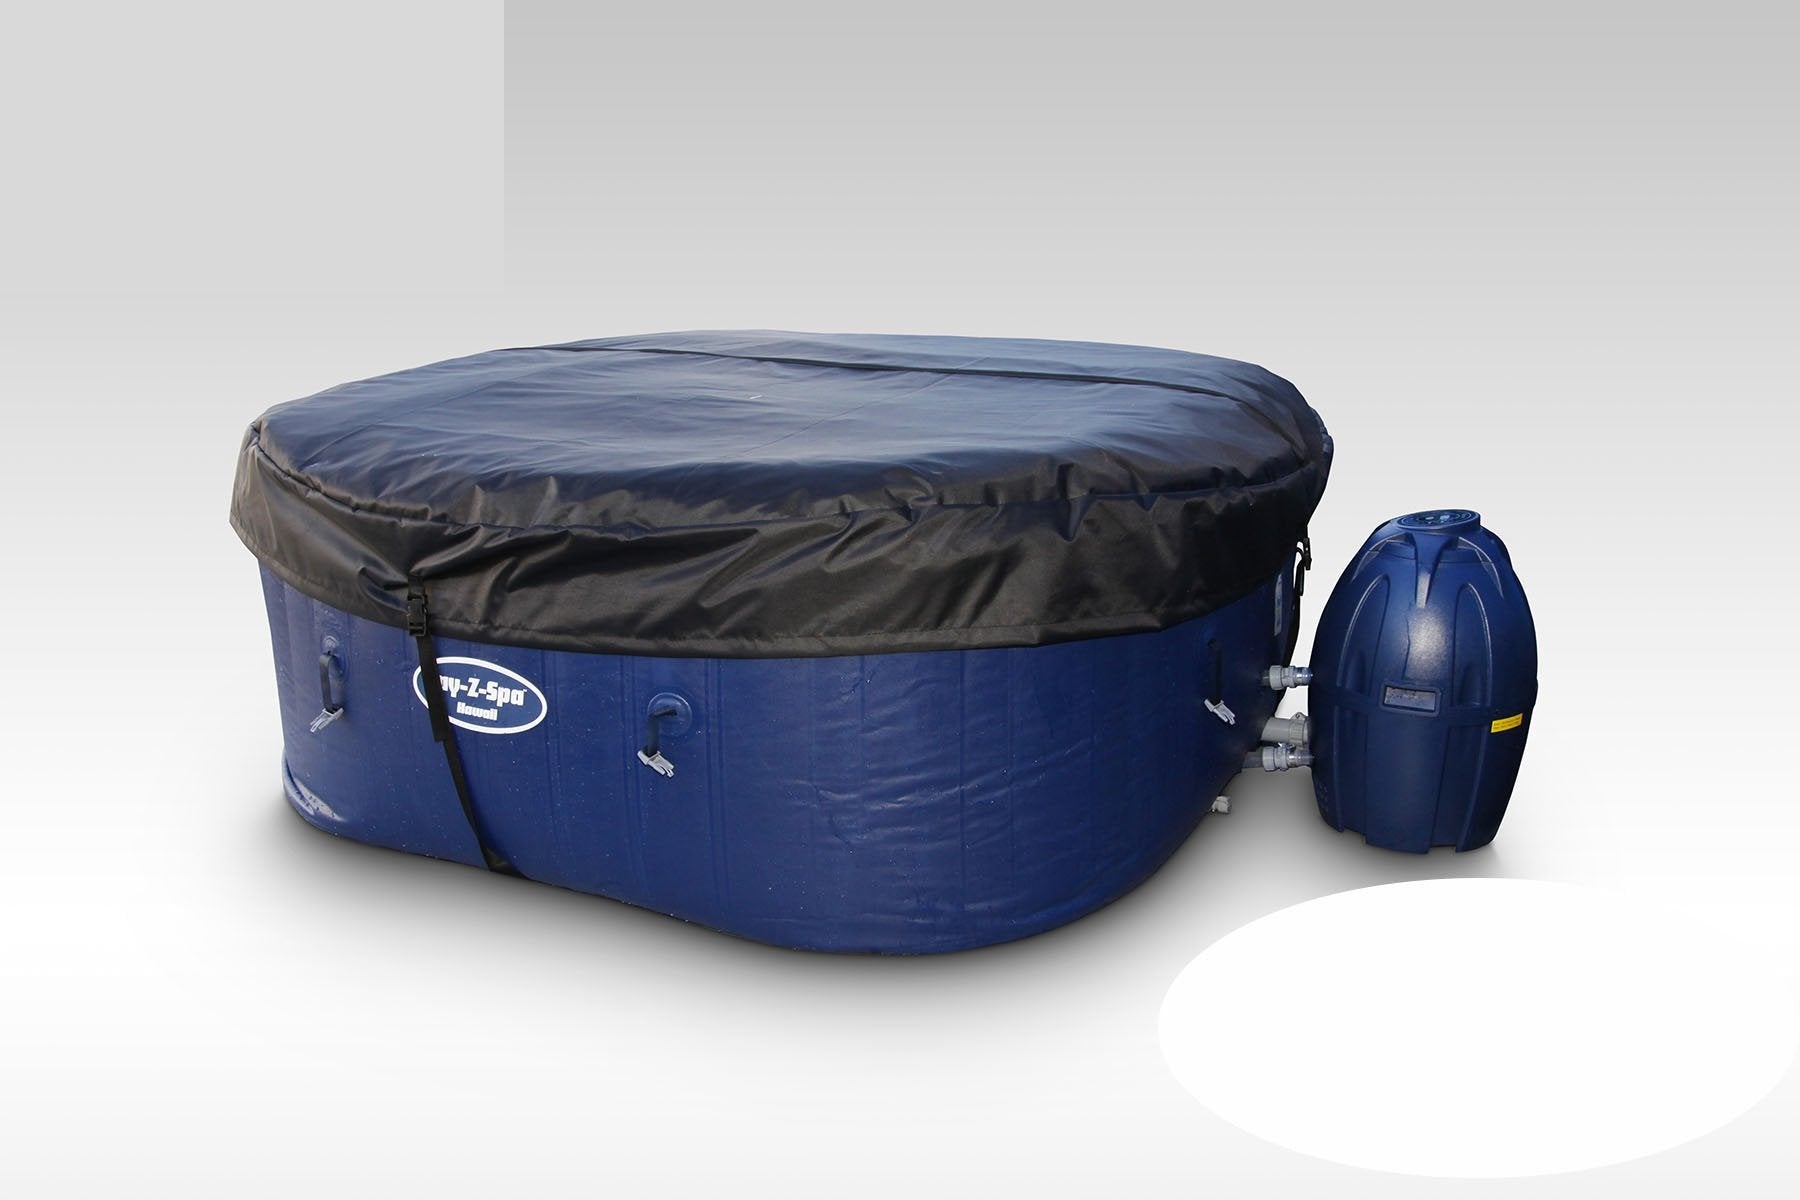 Insulated Lids / Cover for Inflatable Hot Tubs – Protective & Improves Energy Efficiency – Cwtchy Covers